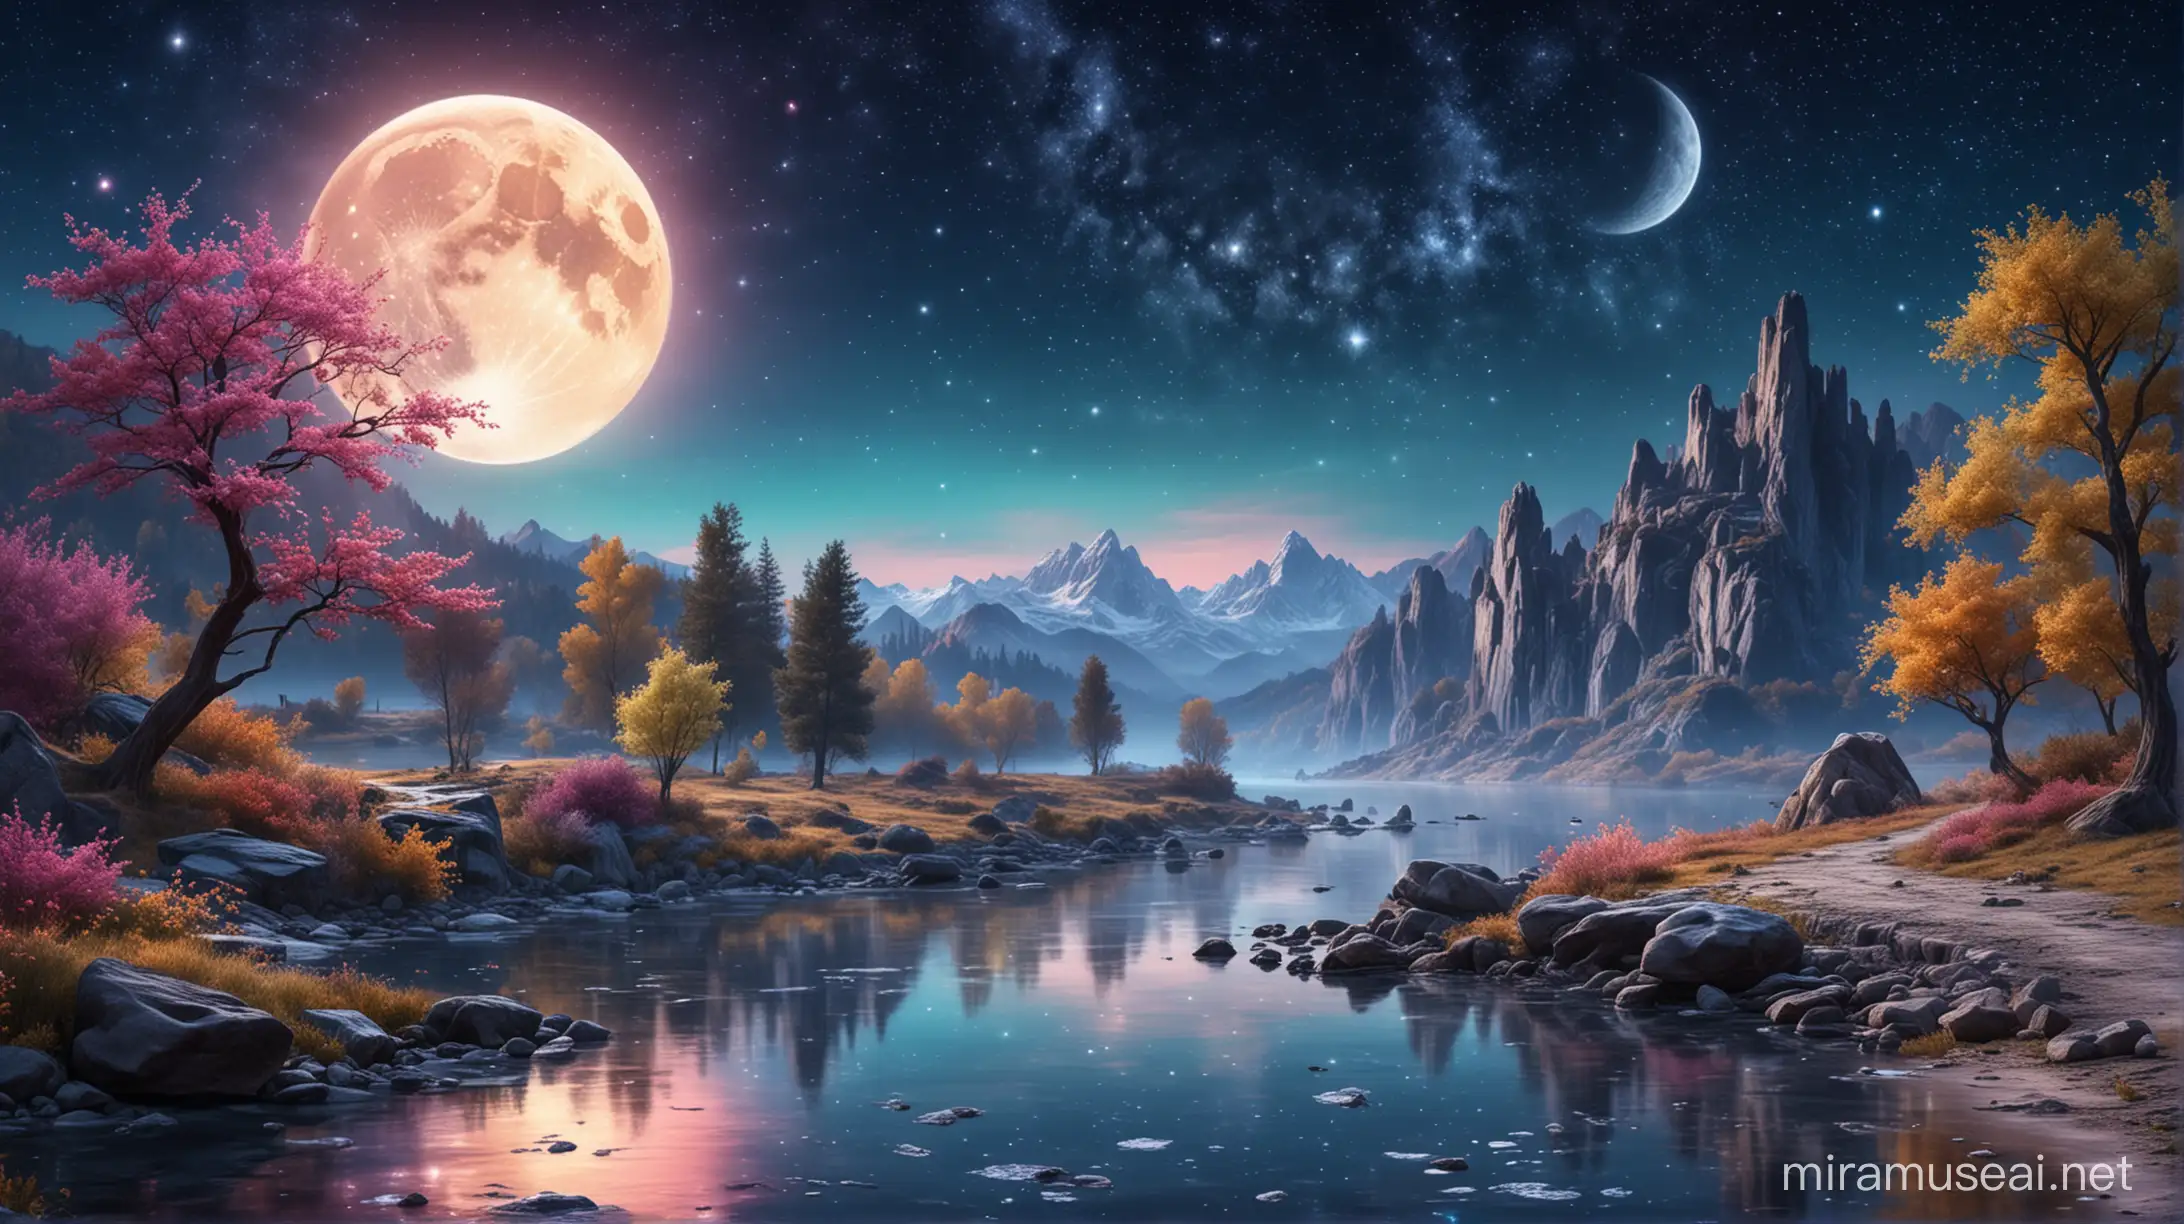 beautiful colorful scene of a fairytale, the moon, a river, stars and crystals